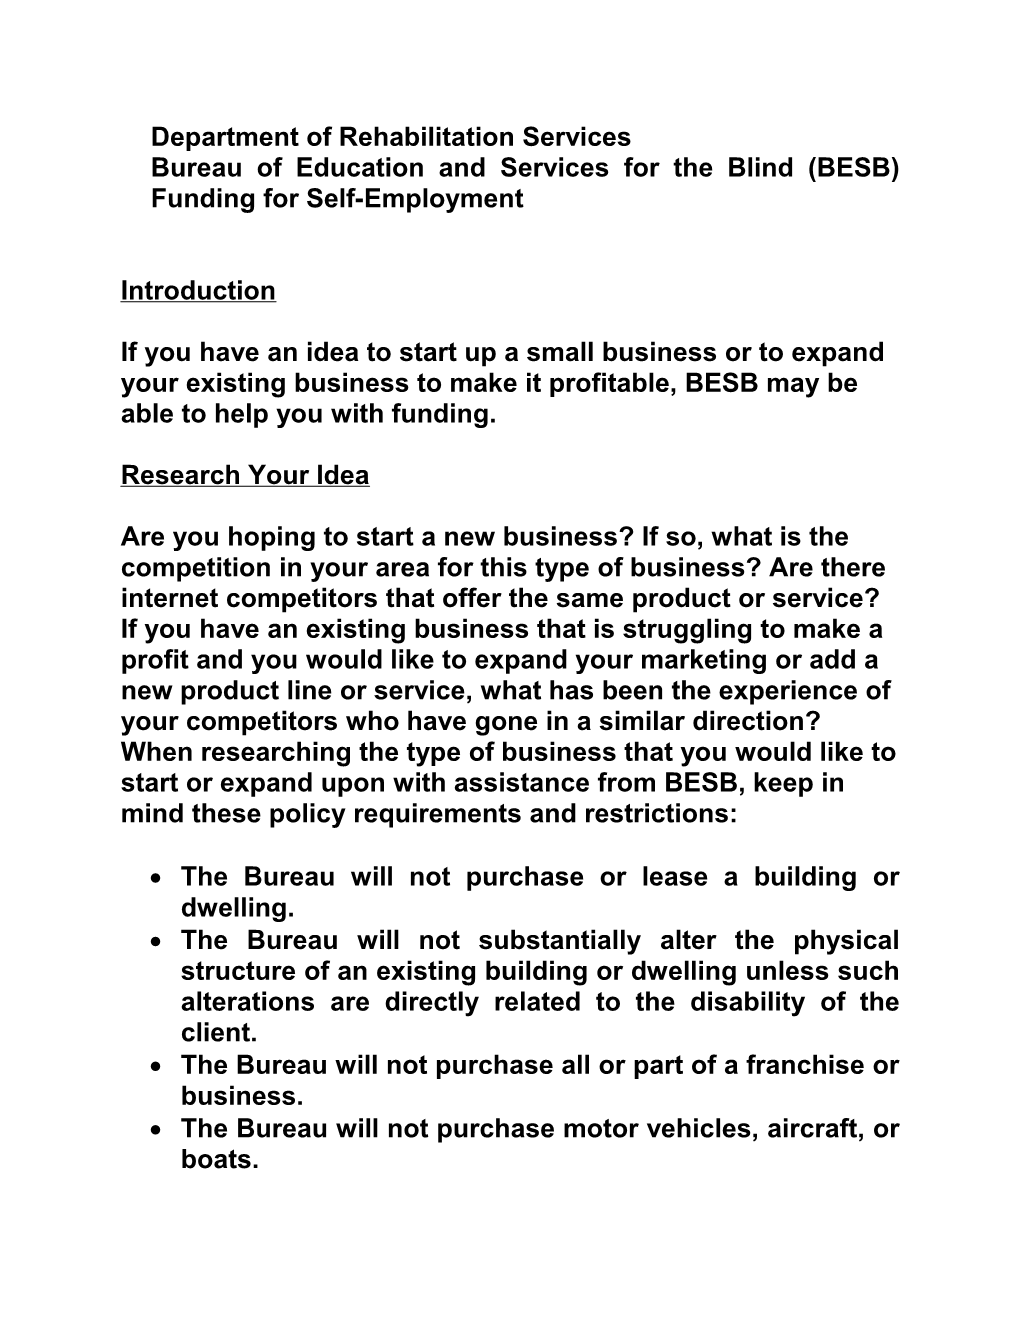 BESB Funding for Self-Employment